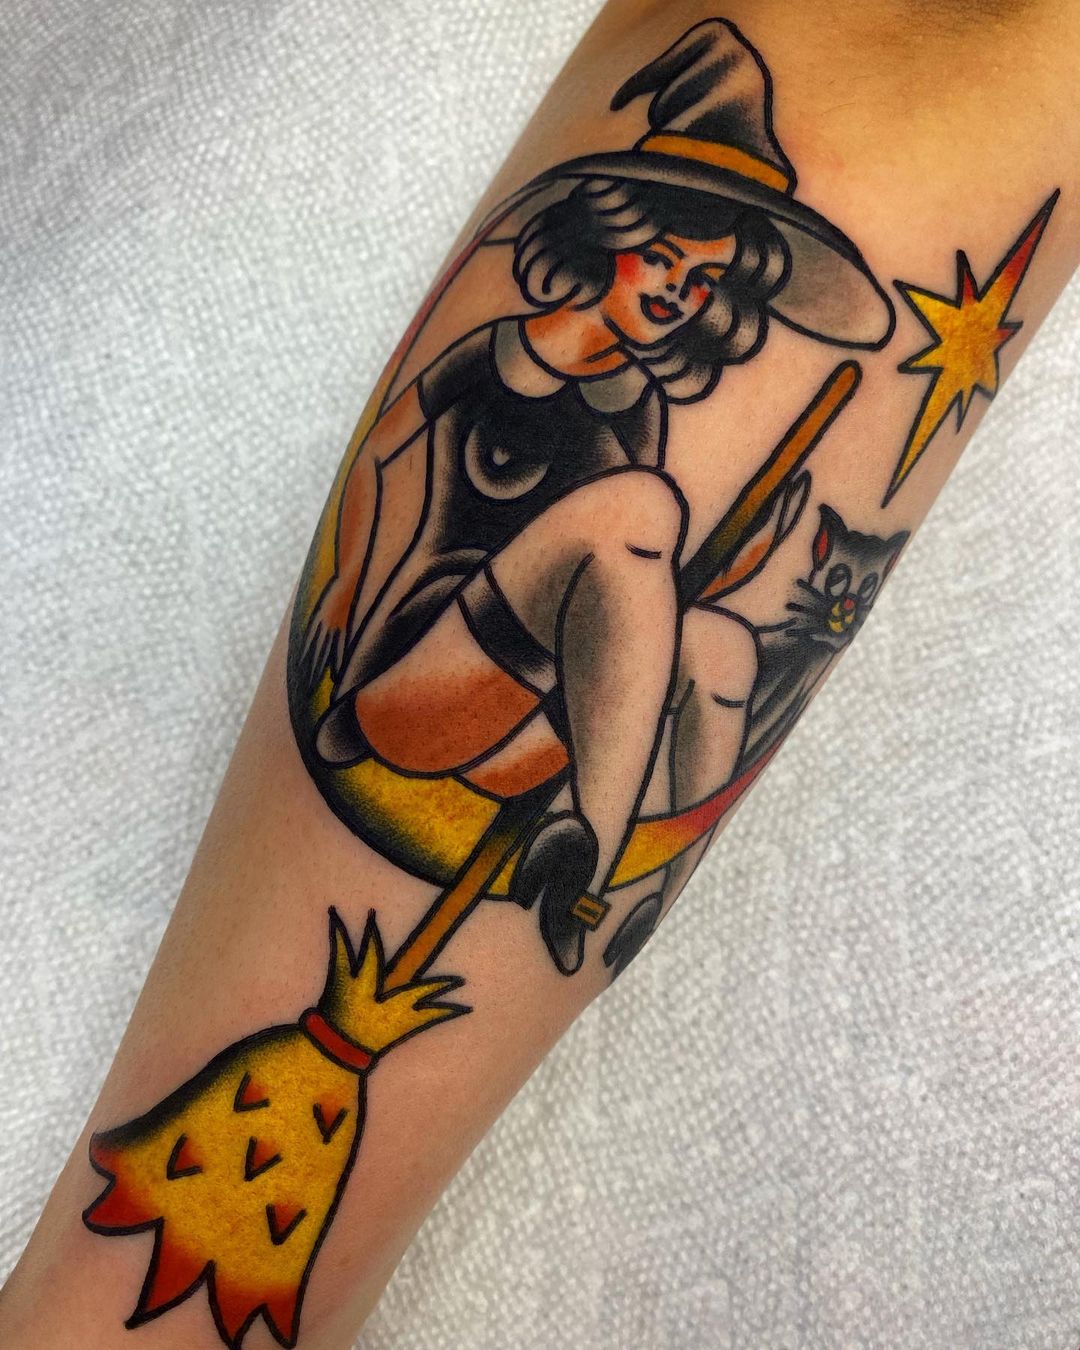 traditional witch tattoo designs ideas by batsforbrains